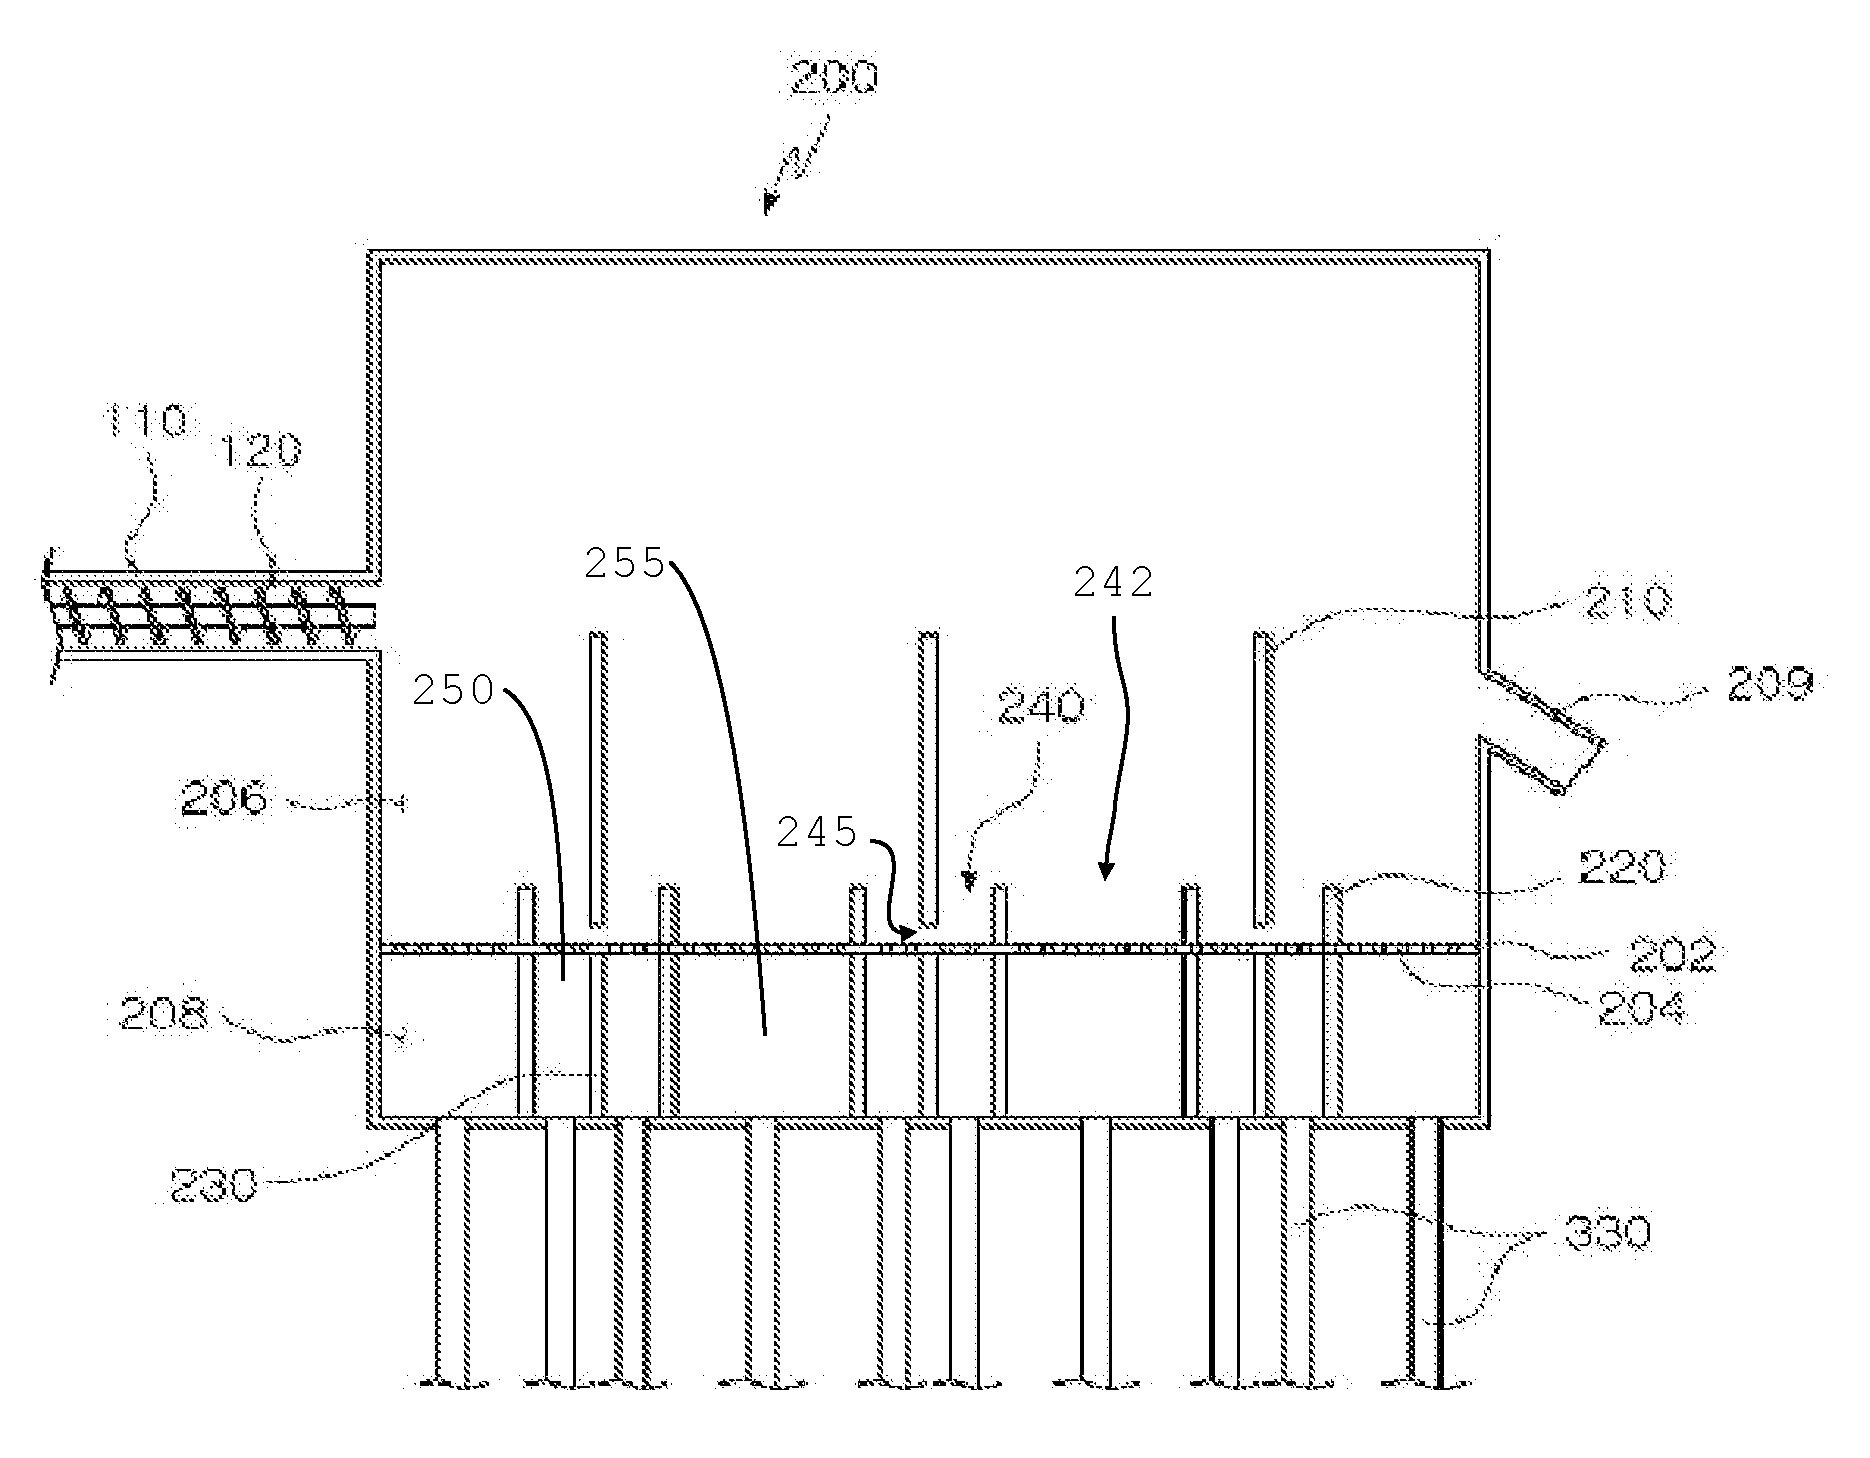 Fluidized bed drying apparatus